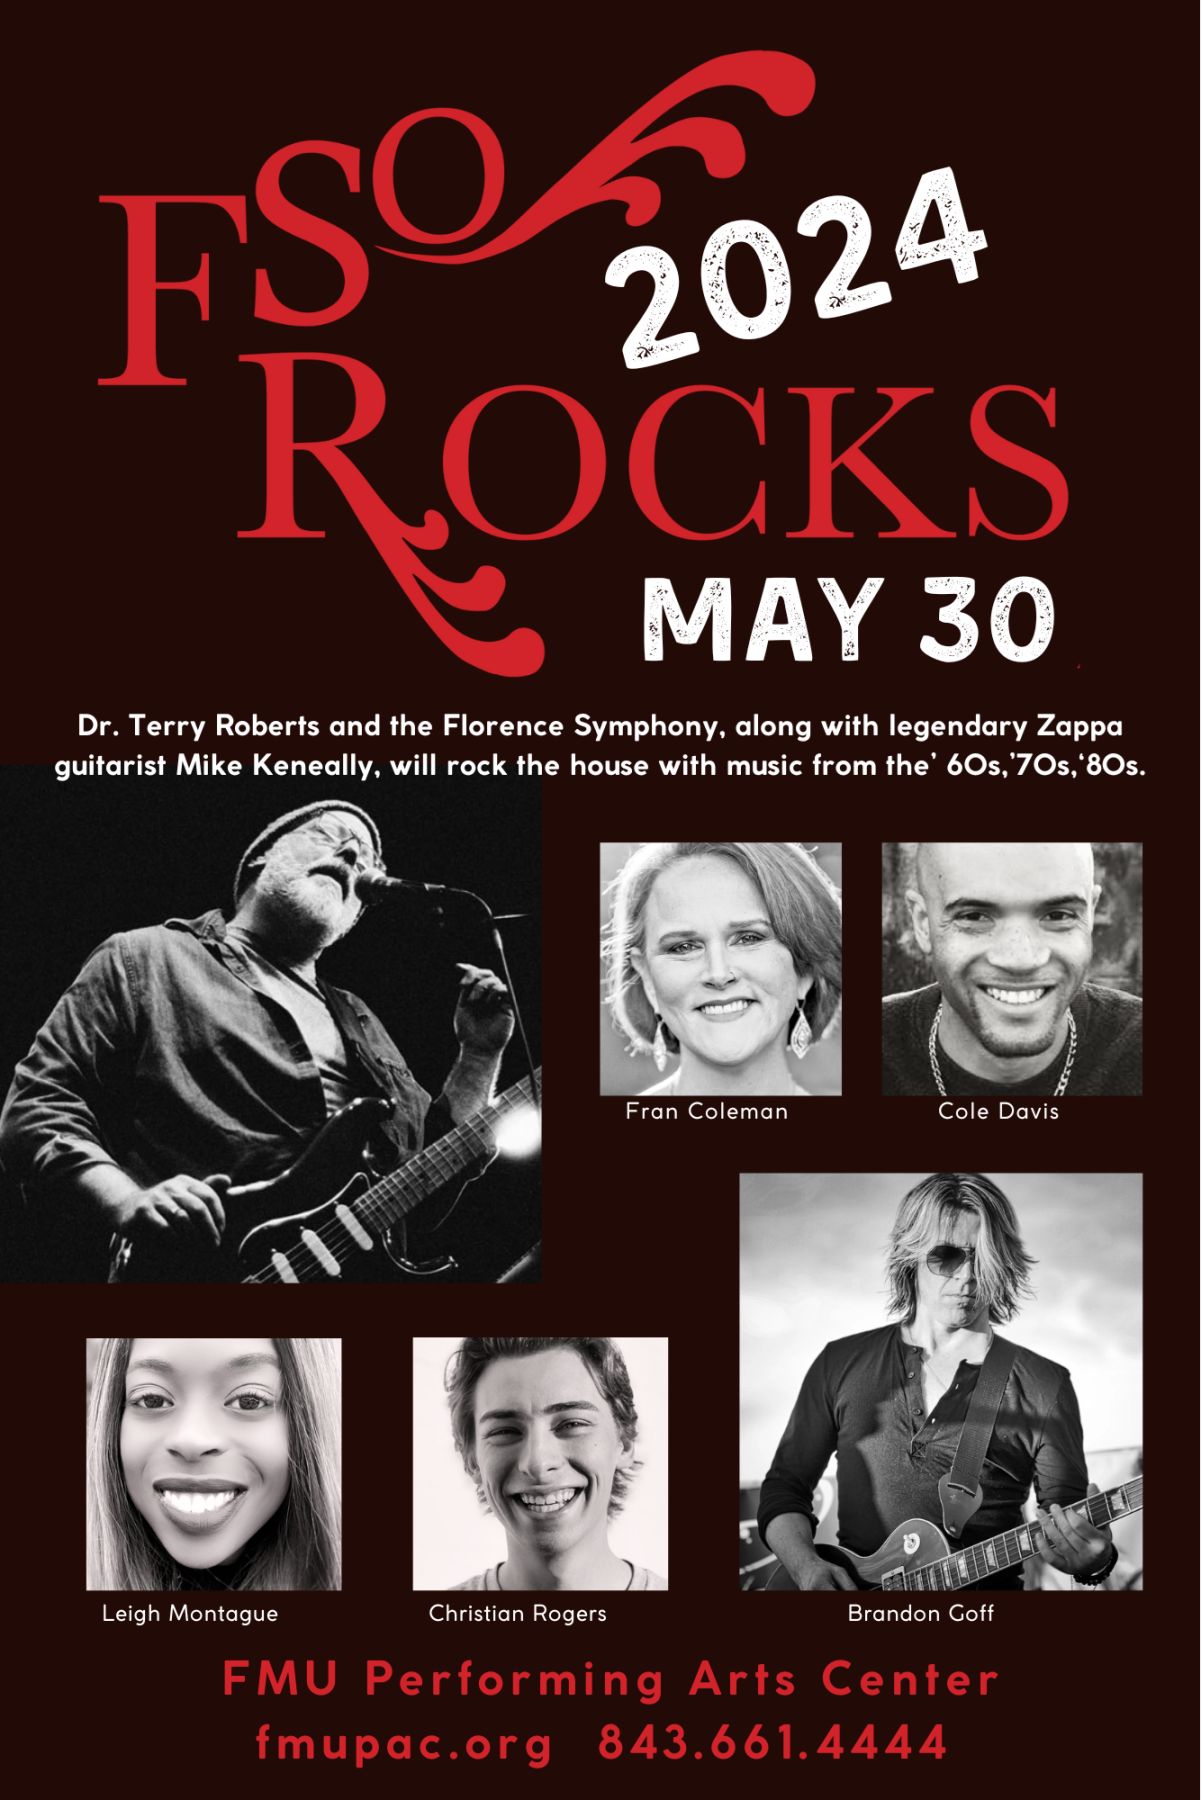 Black and white poster with red lettering featuring musicians from FSO Rocks Concert